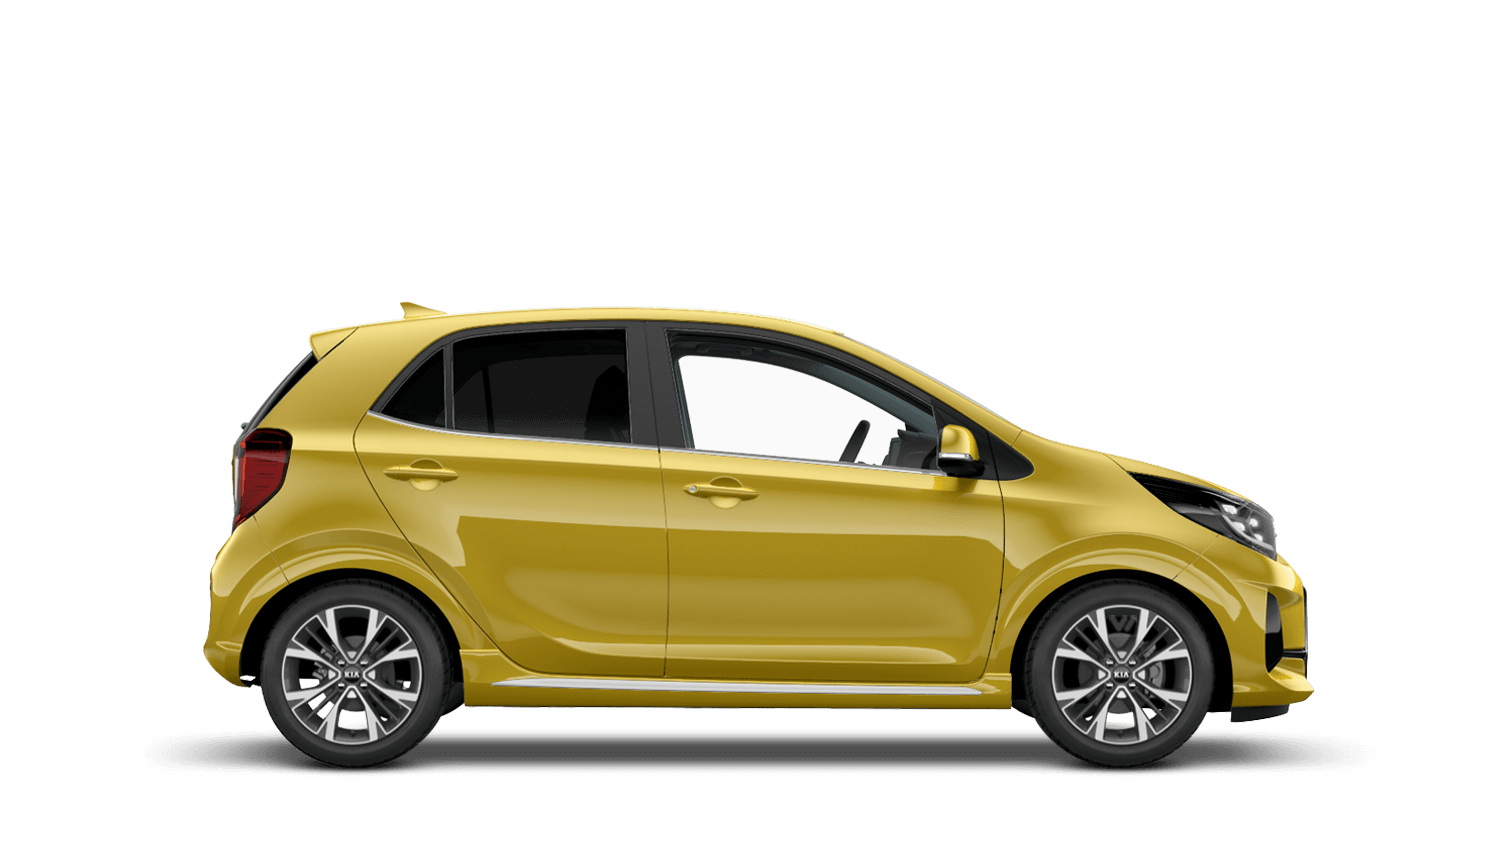 Kia Picanto new car review, UK price, picture gallery